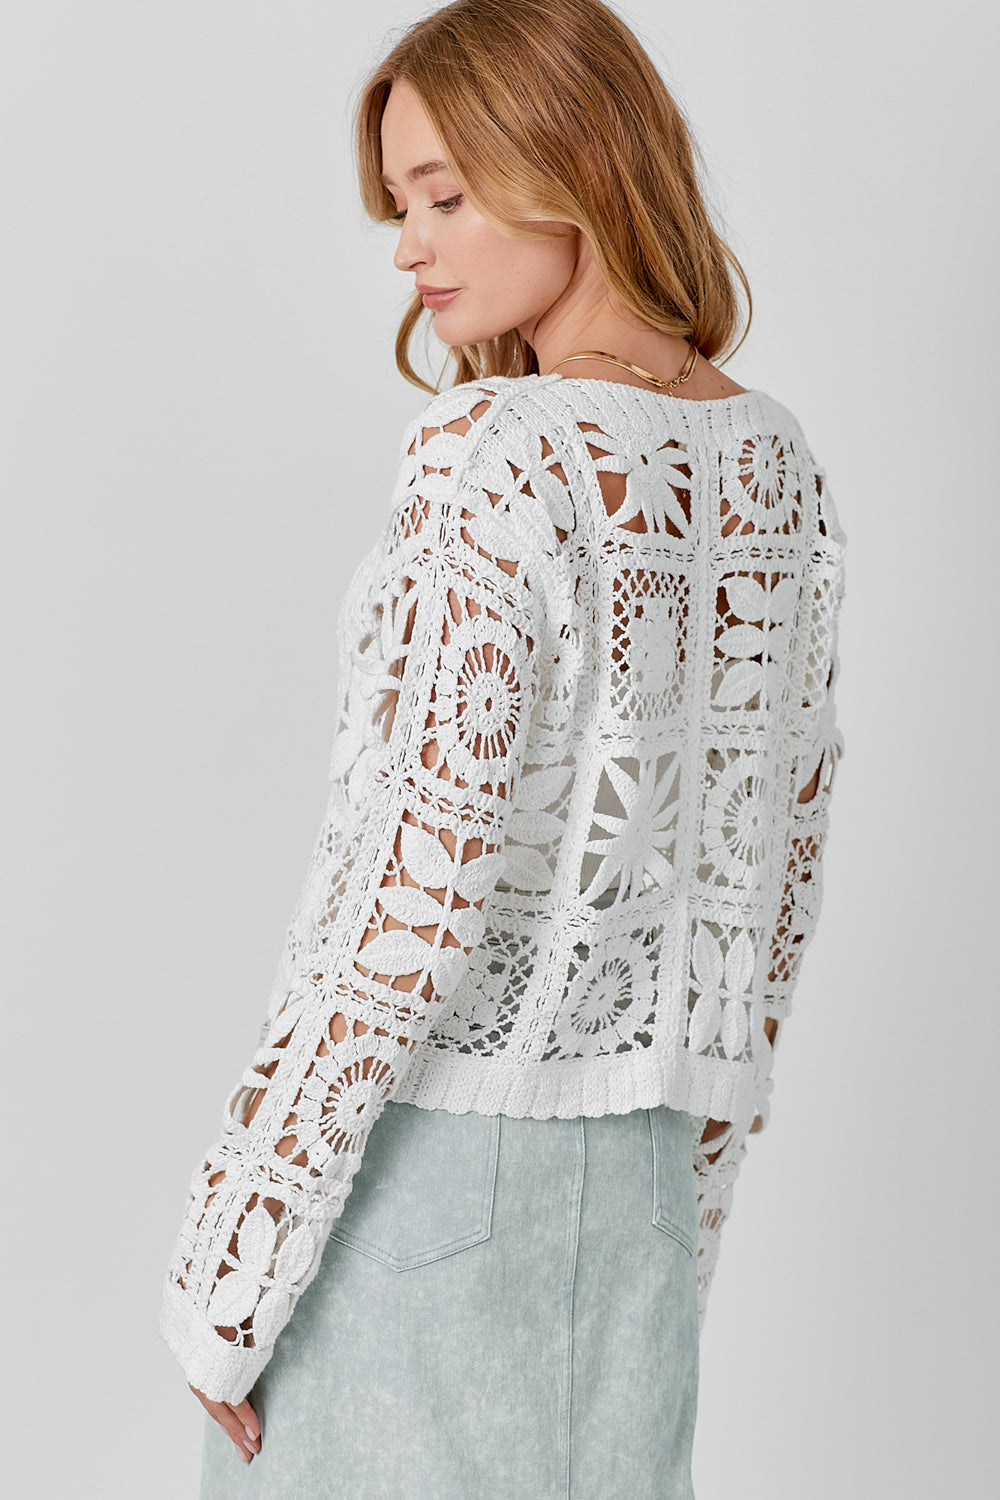 Crochet Button Up Jacket - Off White